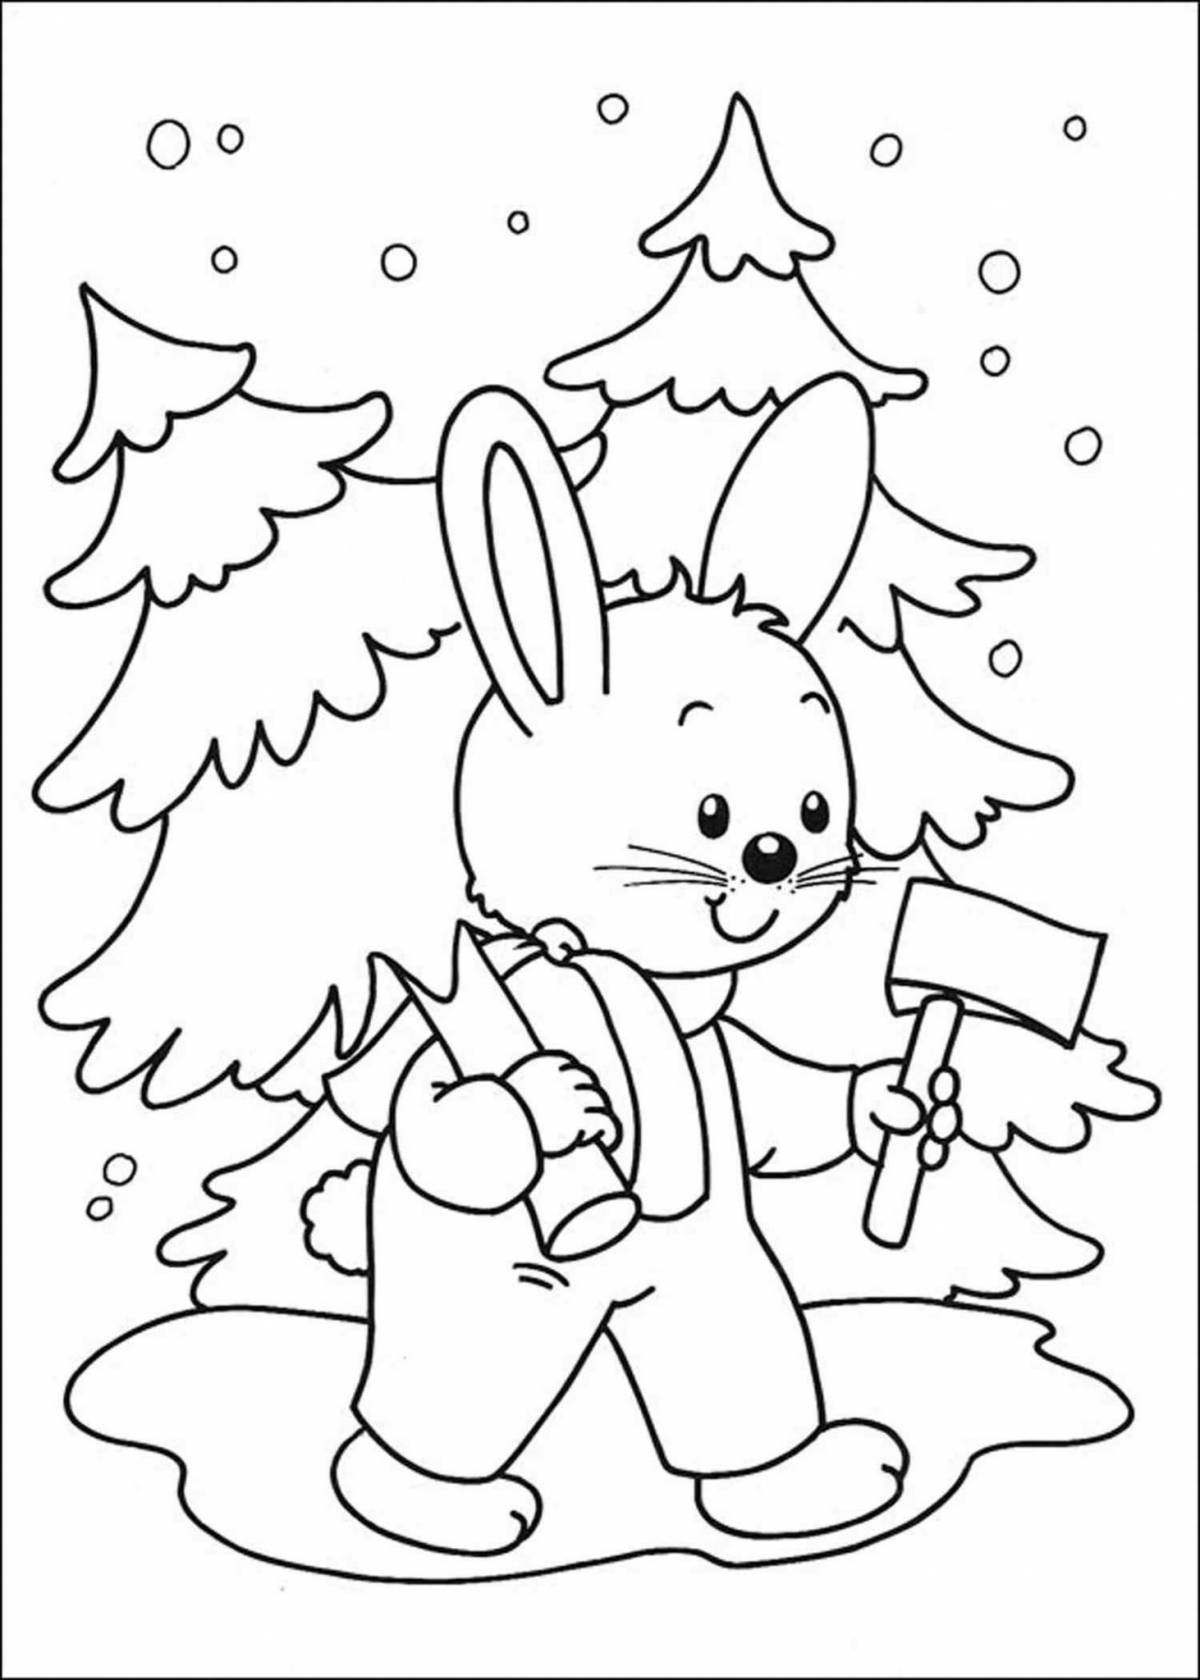 A funny Christmas coloring book for kids